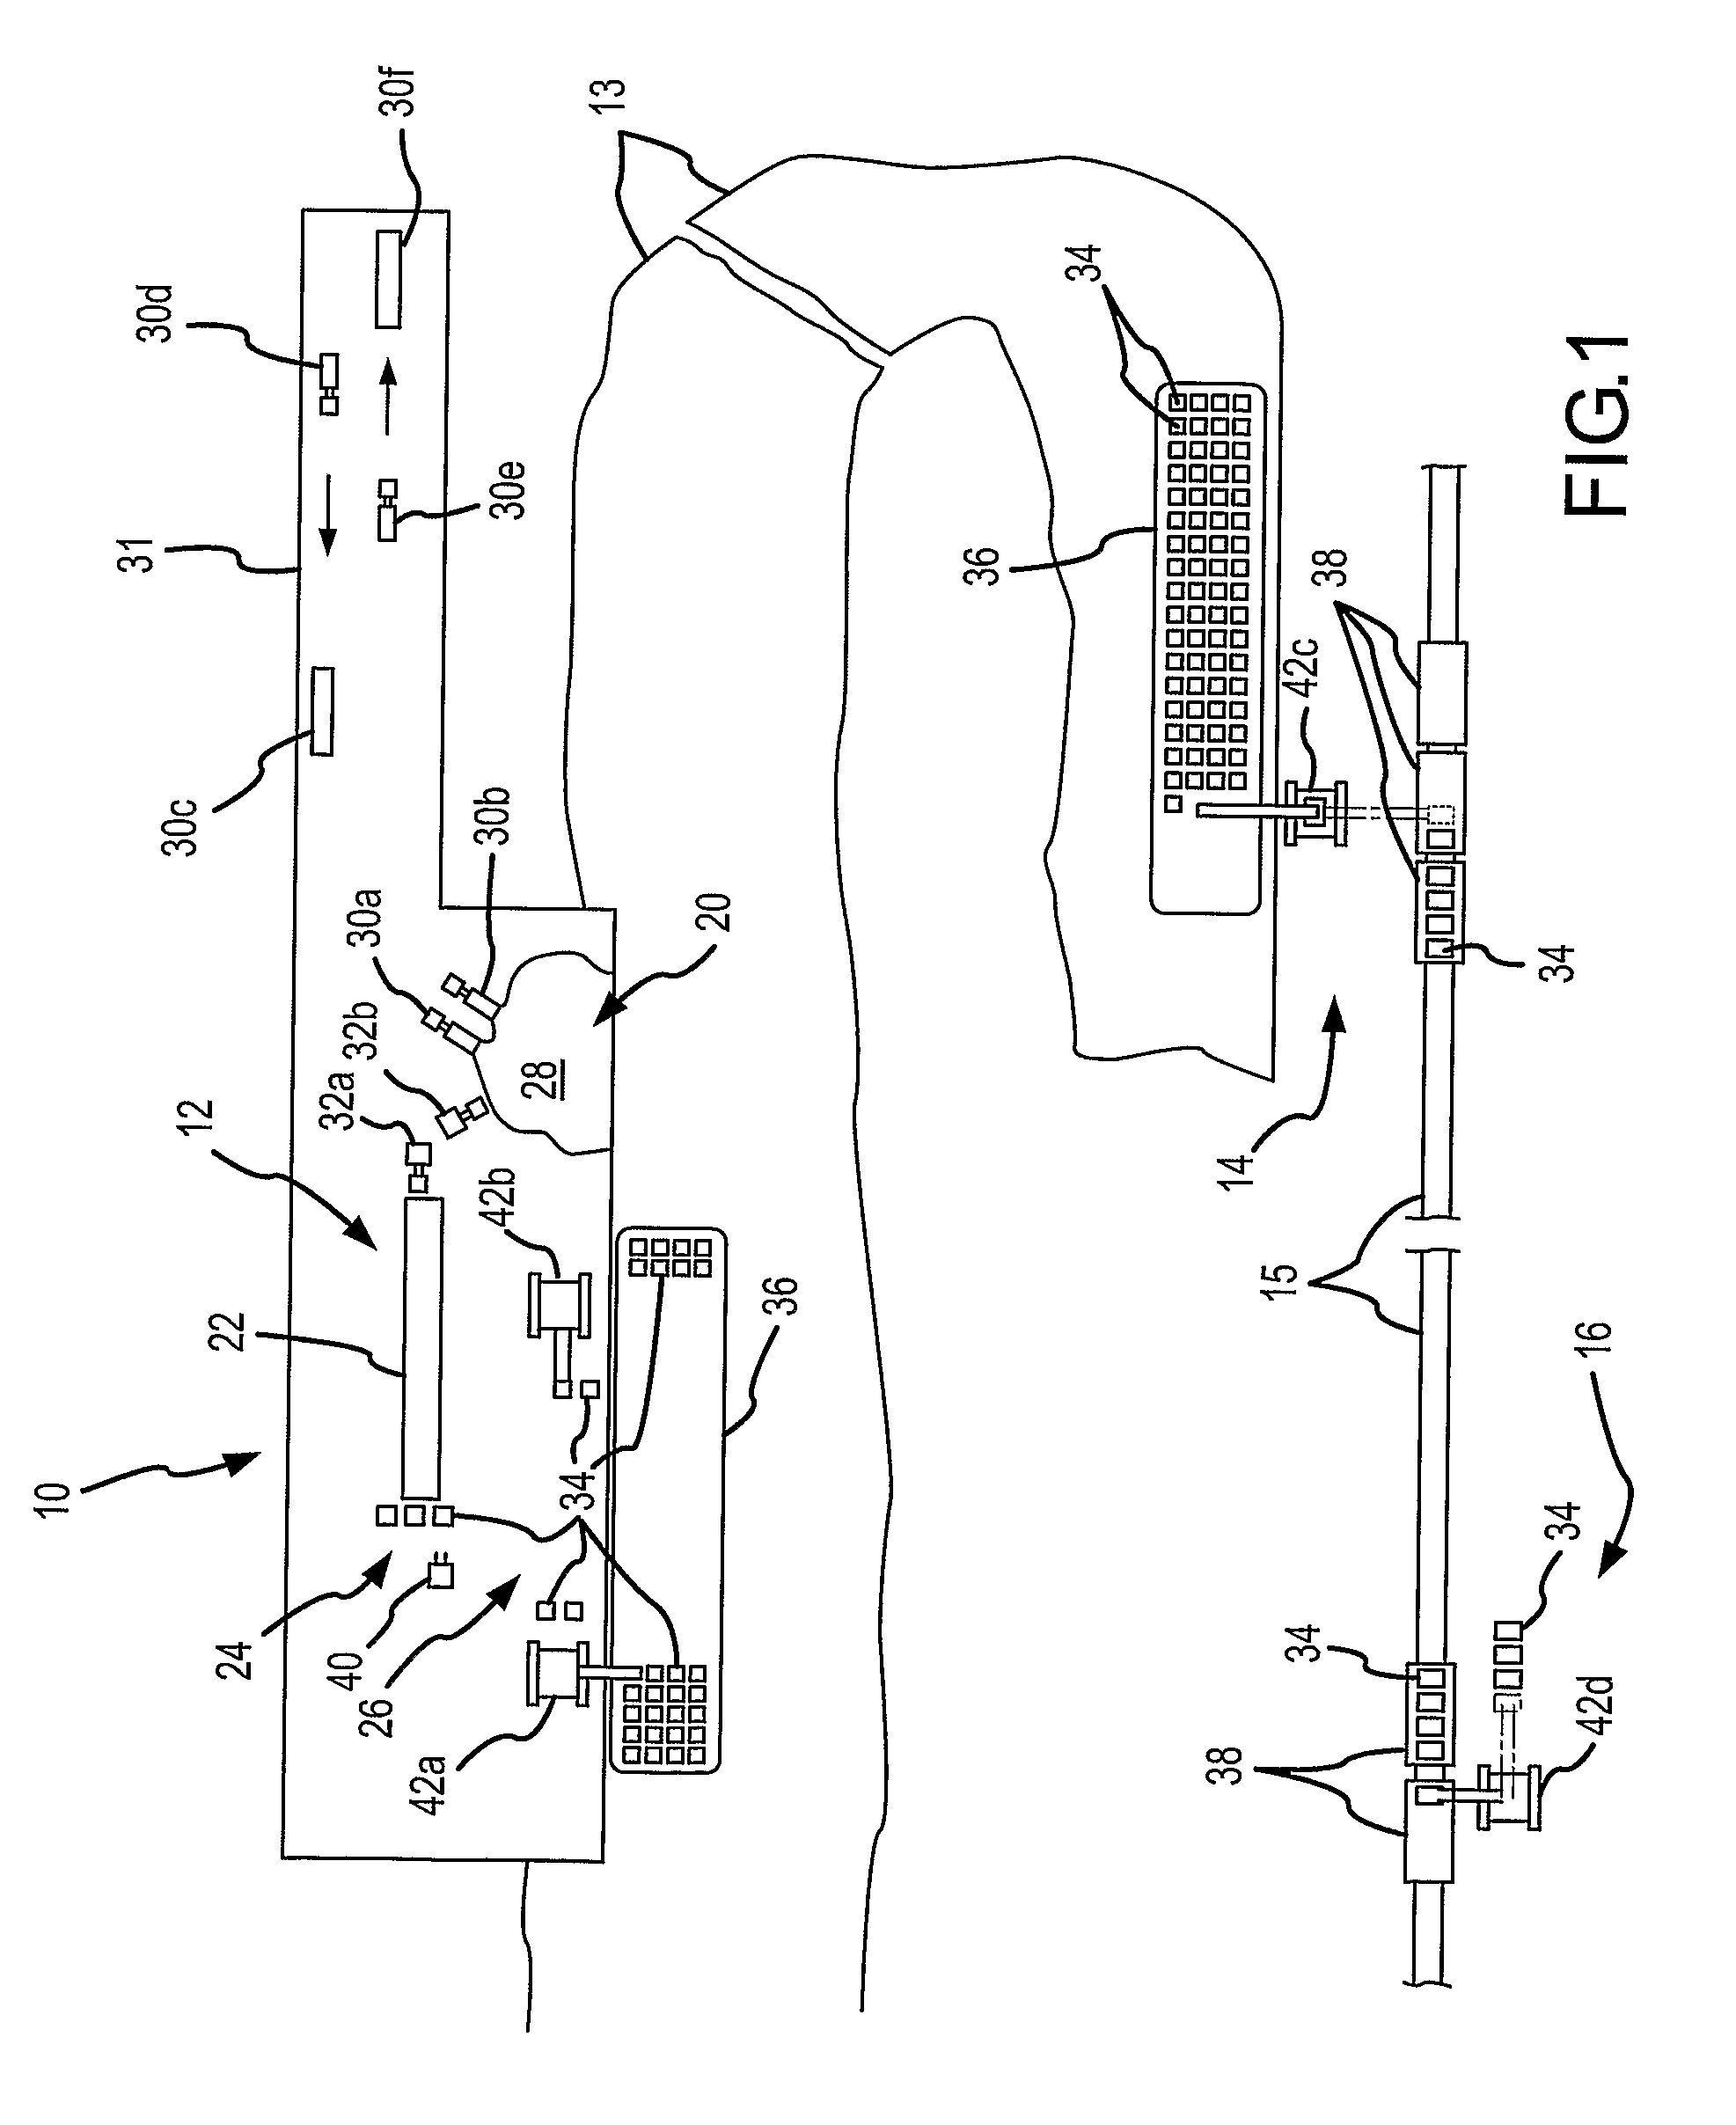 Systems and methods of processing and transporting waste